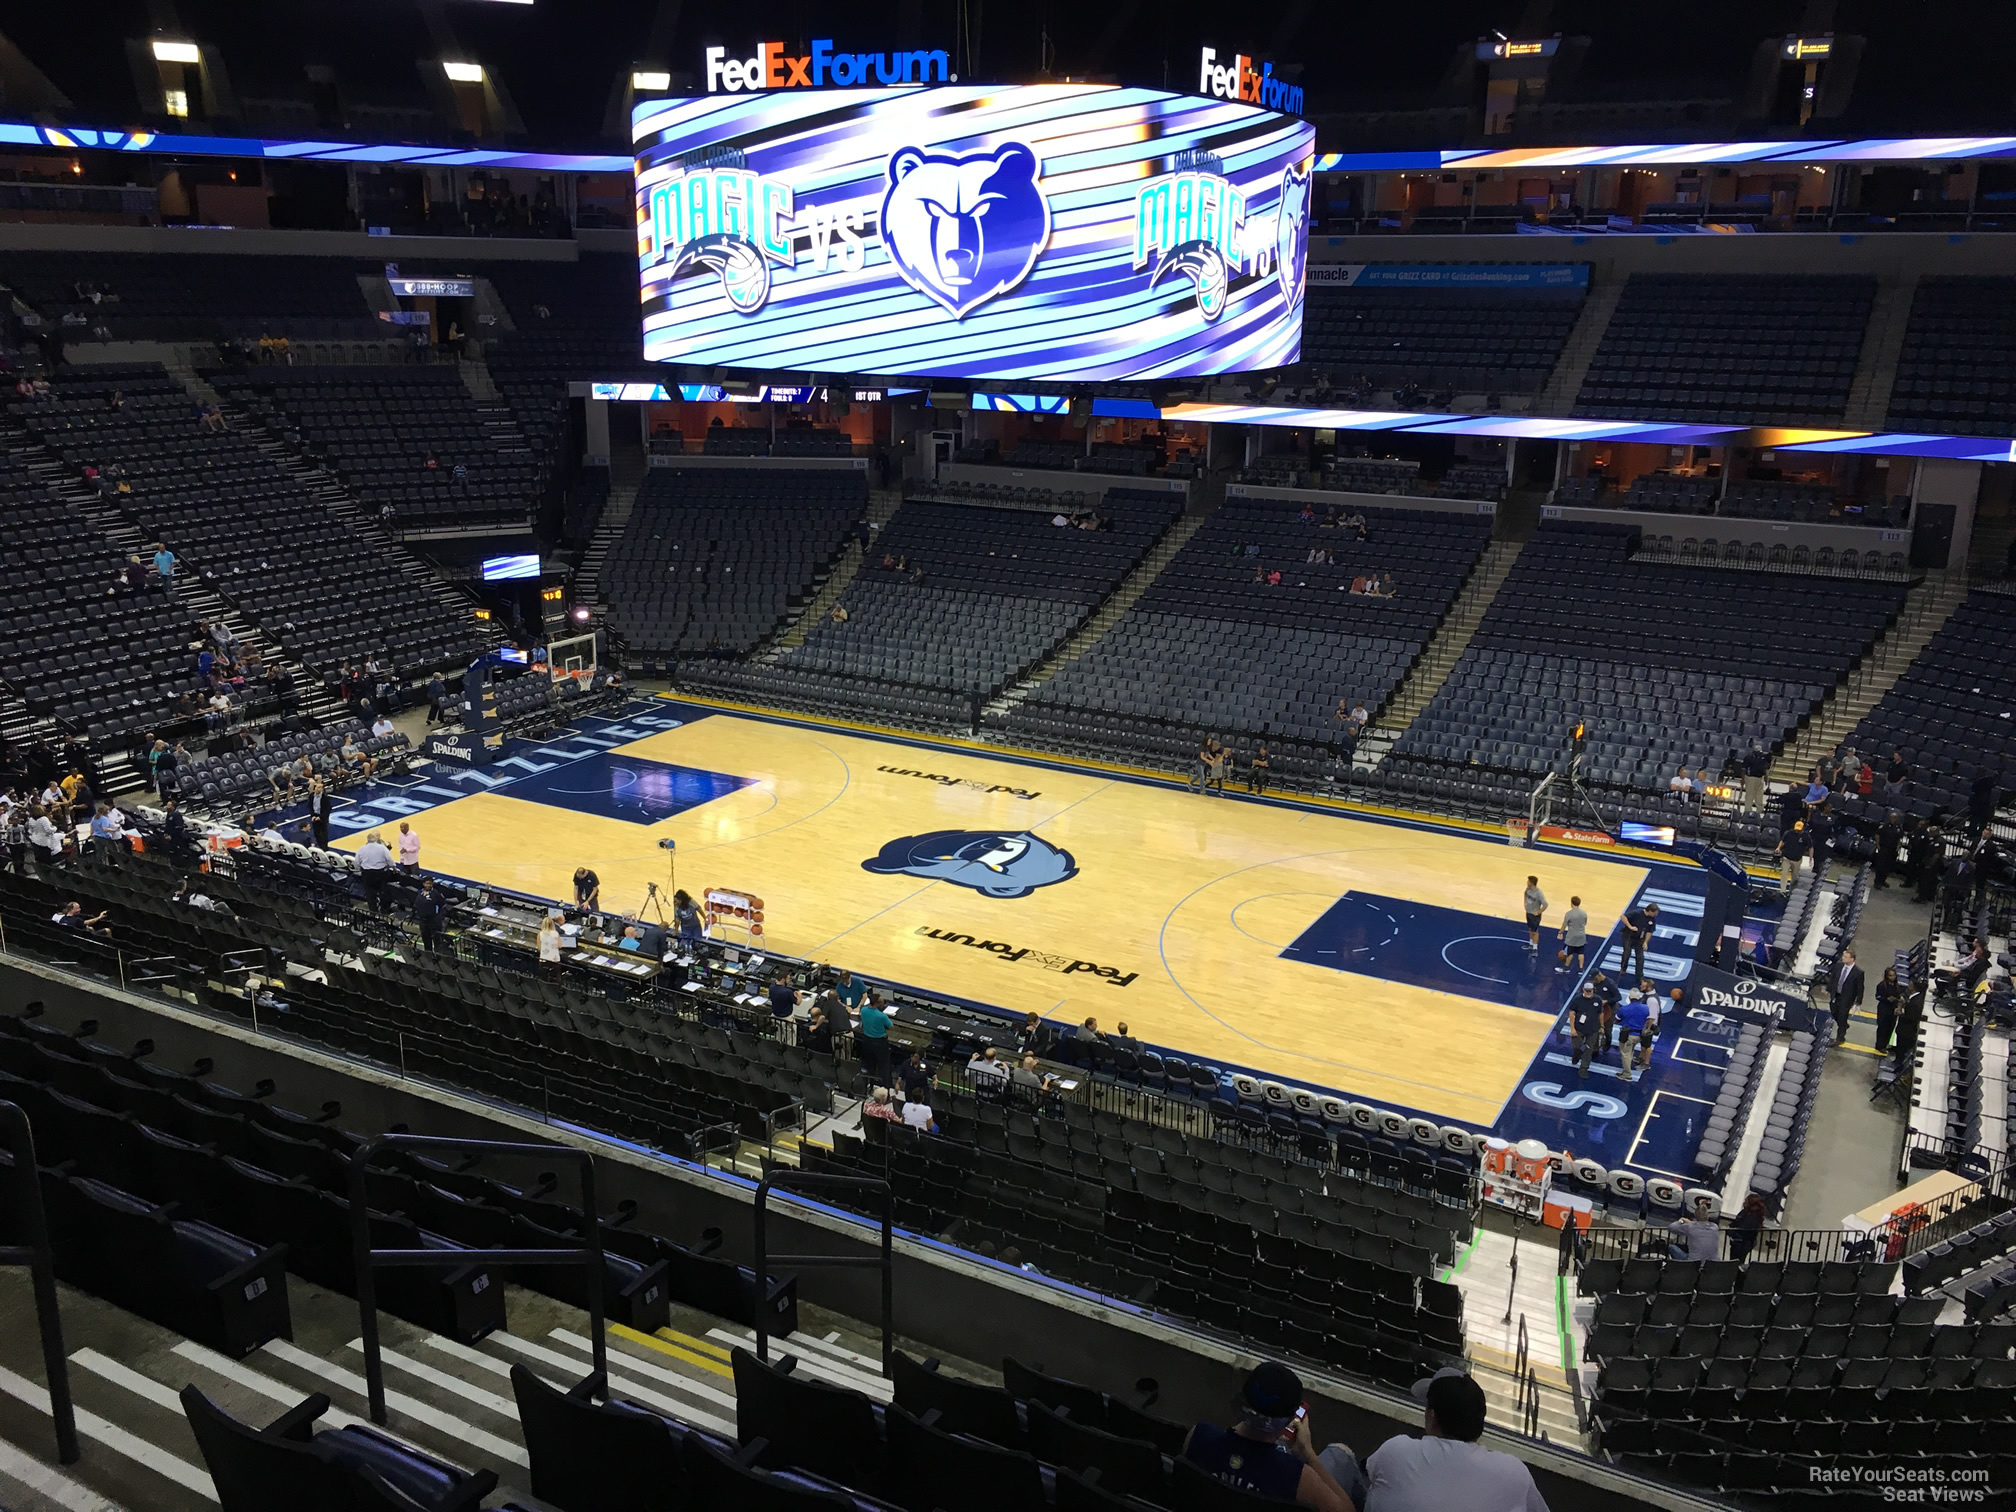 section p6, row h seat view  for basketball - fedex forum